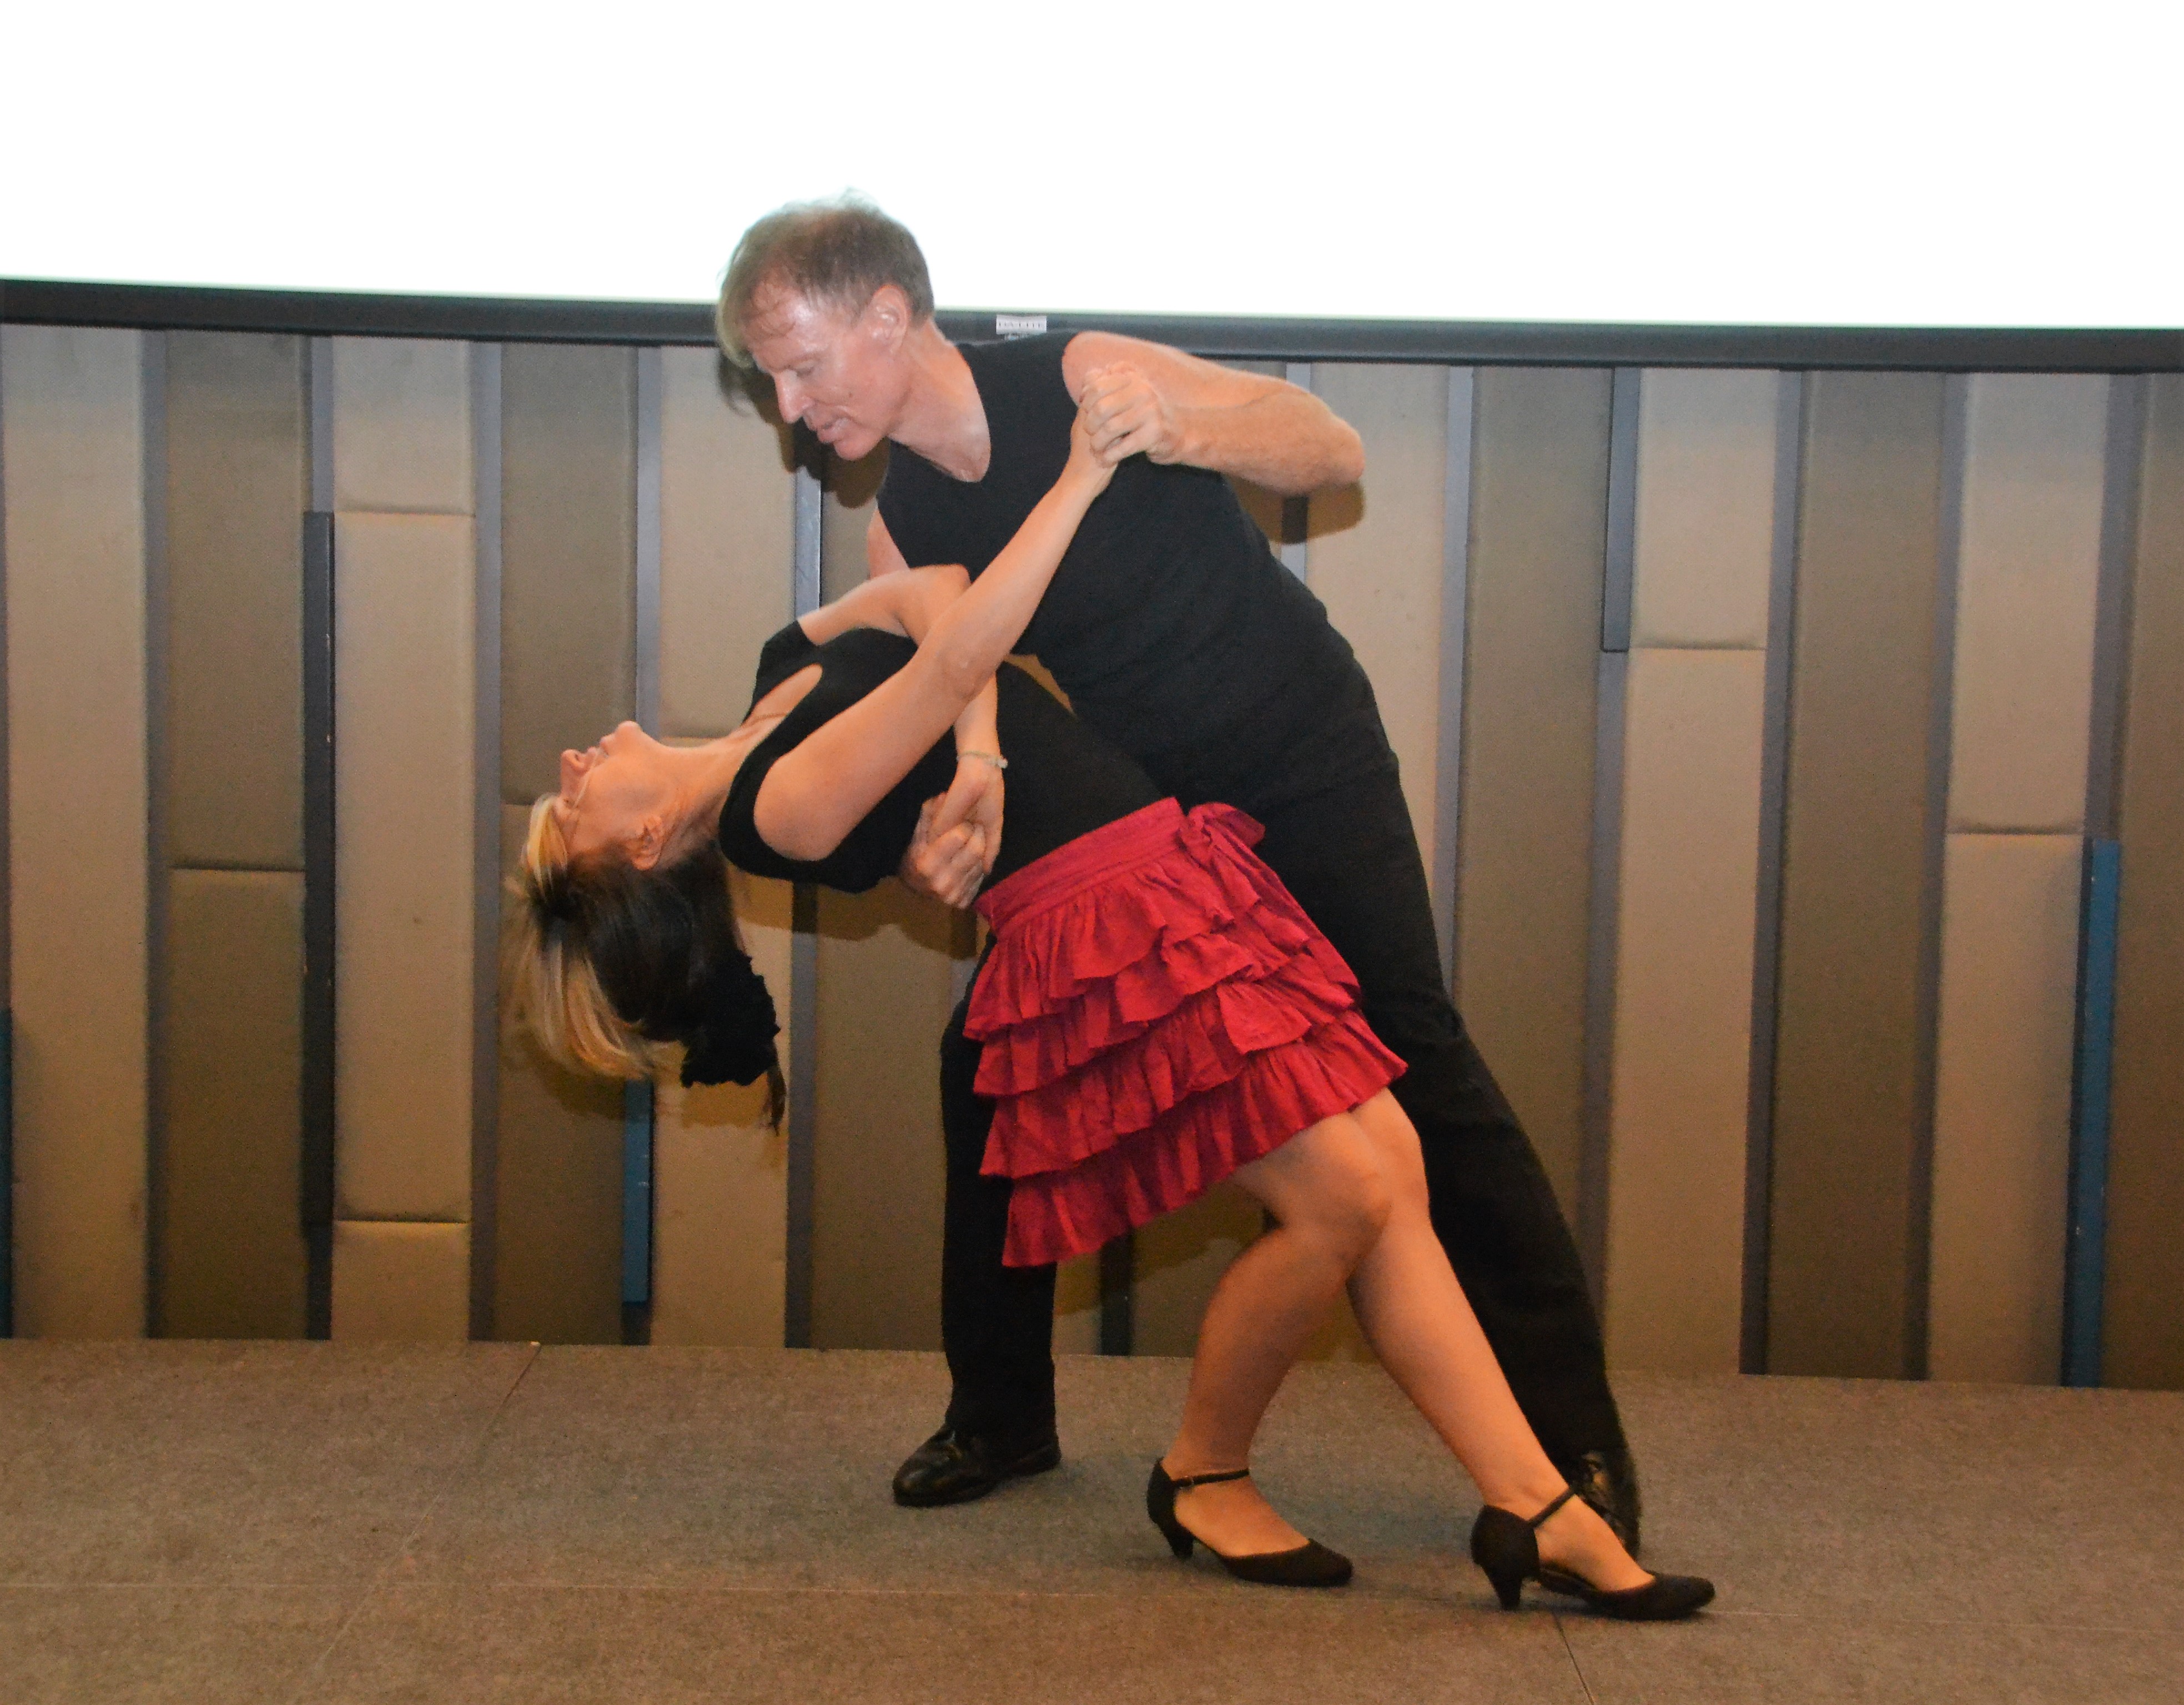 Ren Lexander concluded his presentation by performing a routine with his lovely dancing partner Sofi Ko to the delight of the PCEC members and guests.